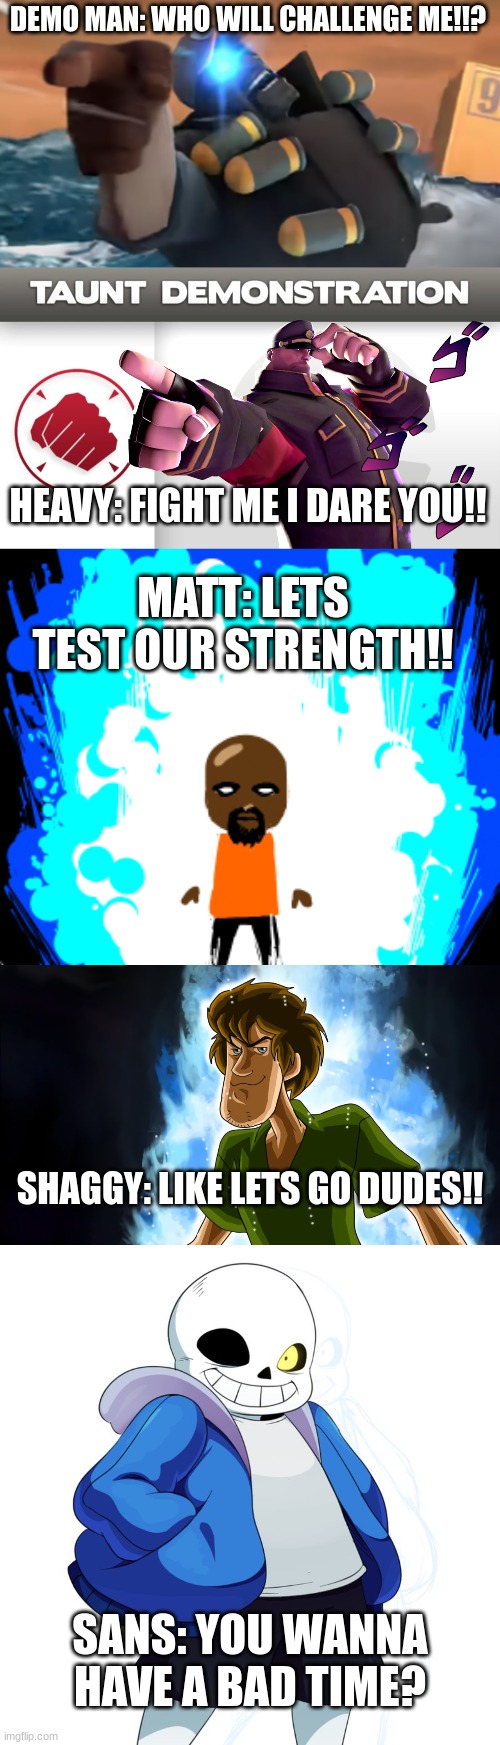 Conflict of Battle | DEMO MAN: WHO WILL CHALLENGE ME!!? HEAVY: FIGHT ME I DARE YOU!! MATT: LETS TEST OUR STRENGTH!! SHAGGY: LIKE LETS GO DUDES!! SANS: YOU WANNA HAVE A BAD TIME? | image tagged in ultra instinct shaggy,sans undertale | made w/ Imgflip meme maker